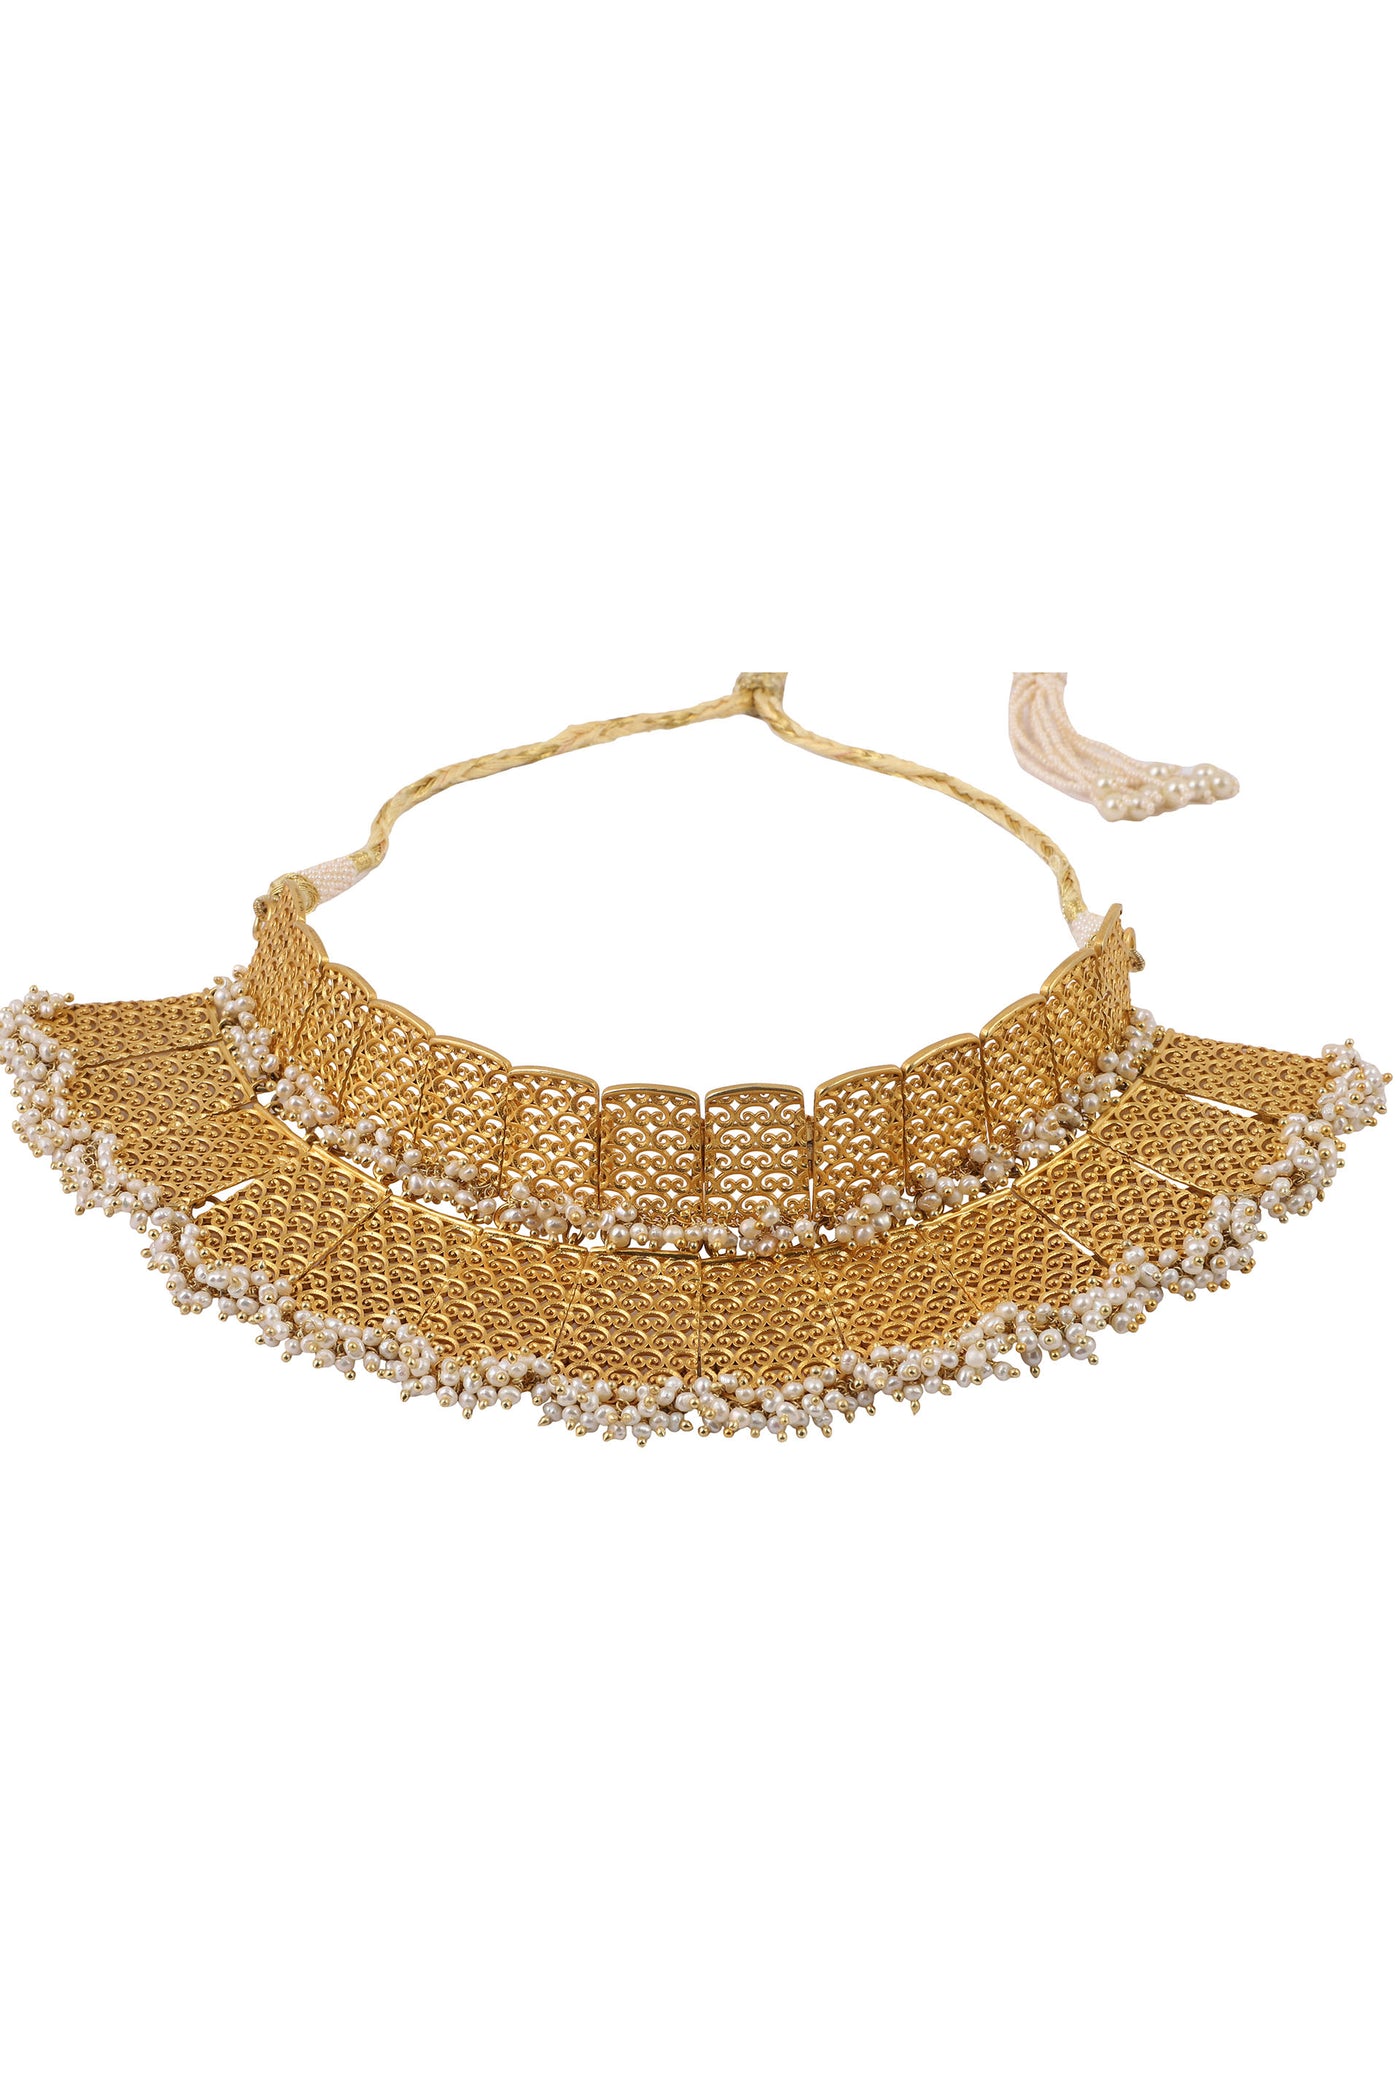 Zariin 22kt Gold Plated Handcrafted White Fresh Water Pearls With Filigree Work Choker Necklace festive indian designer fashion jewellery online shopping melange singapore